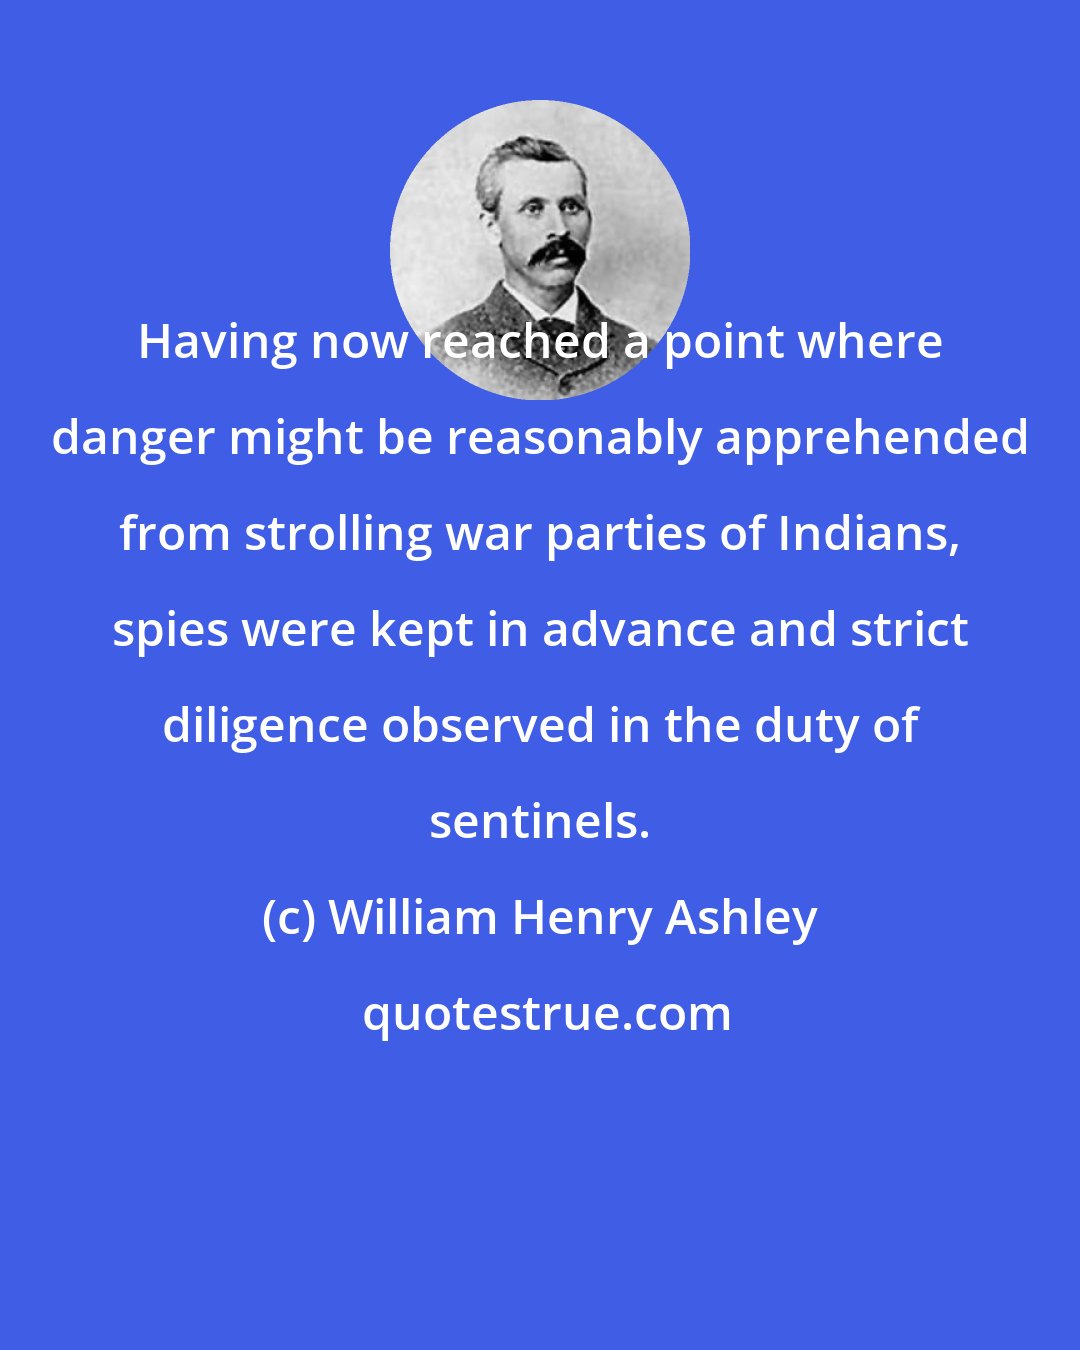 William Henry Ashley: Having now reached a point where danger might be reasonably apprehended from strolling war parties of Indians, spies were kept in advance and strict diligence observed in the duty of sentinels.